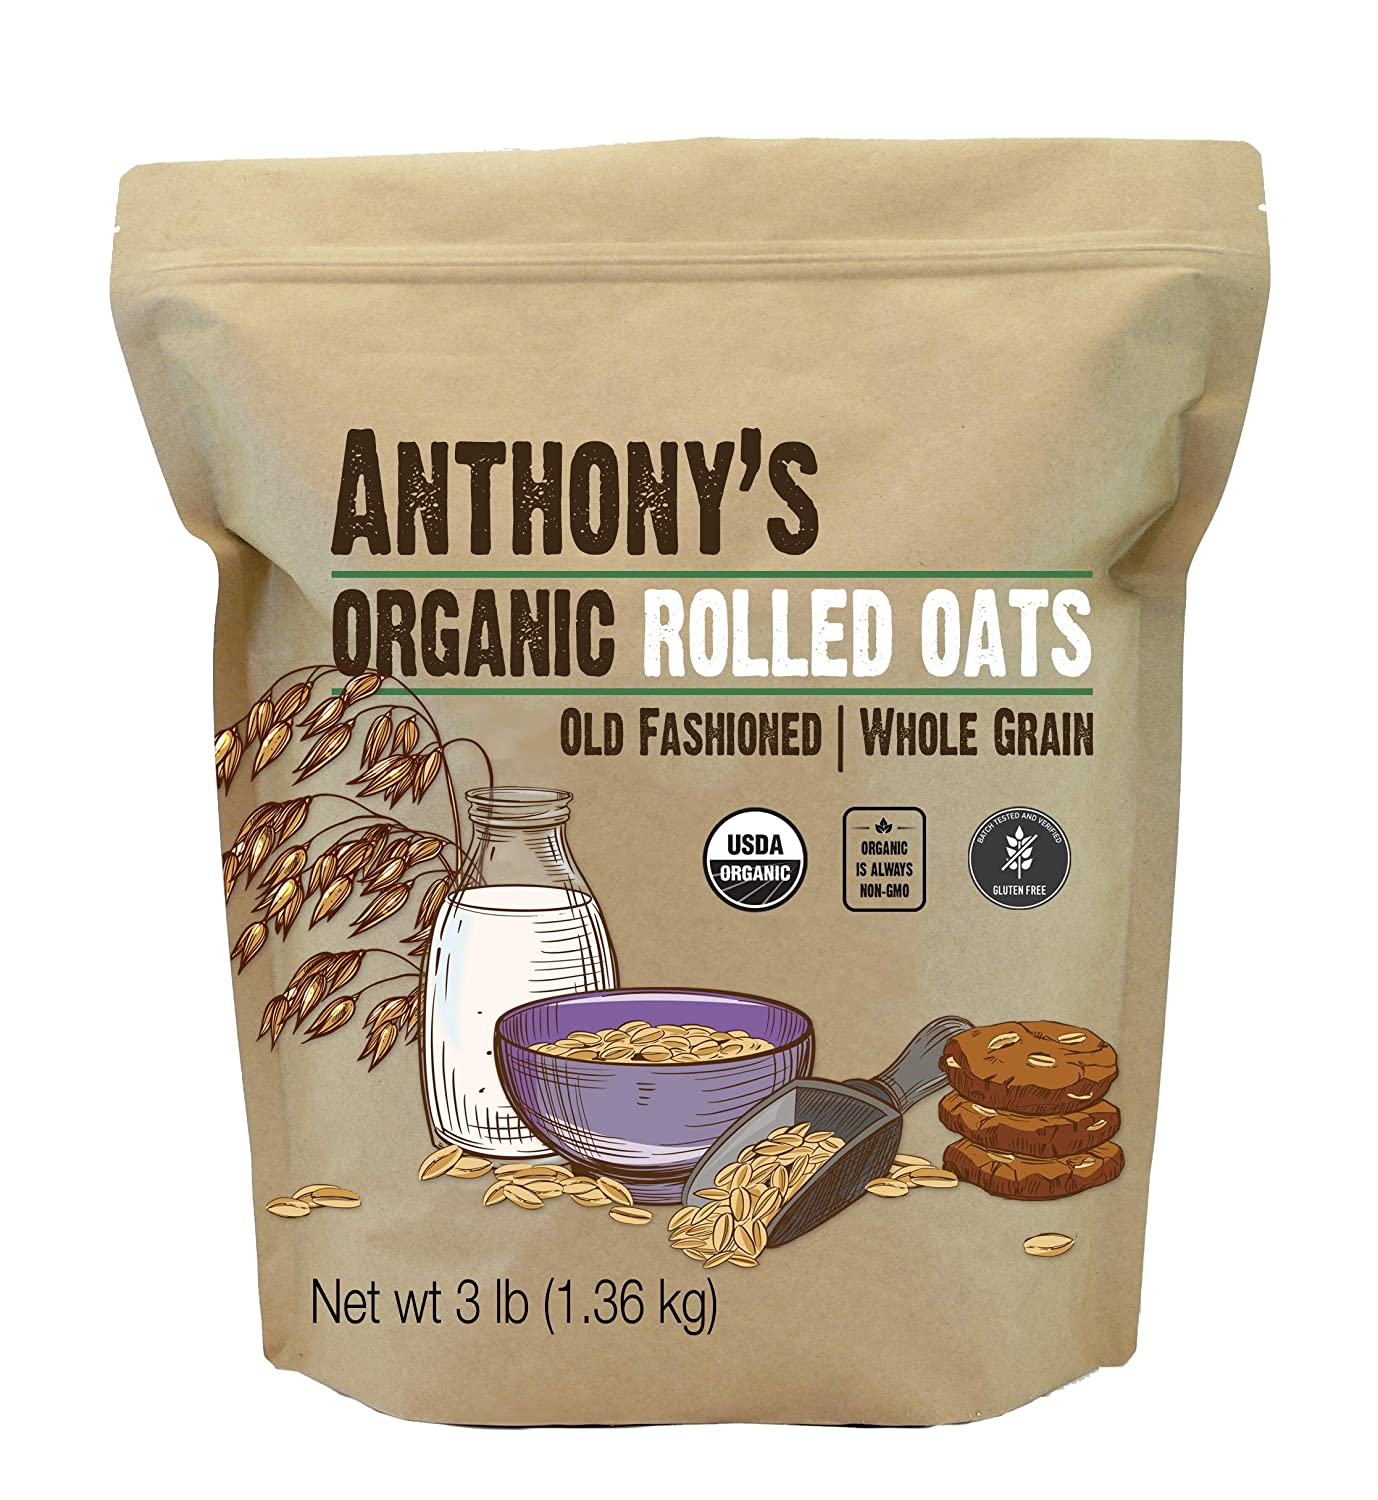 Anthony's Organic Rolled Oats